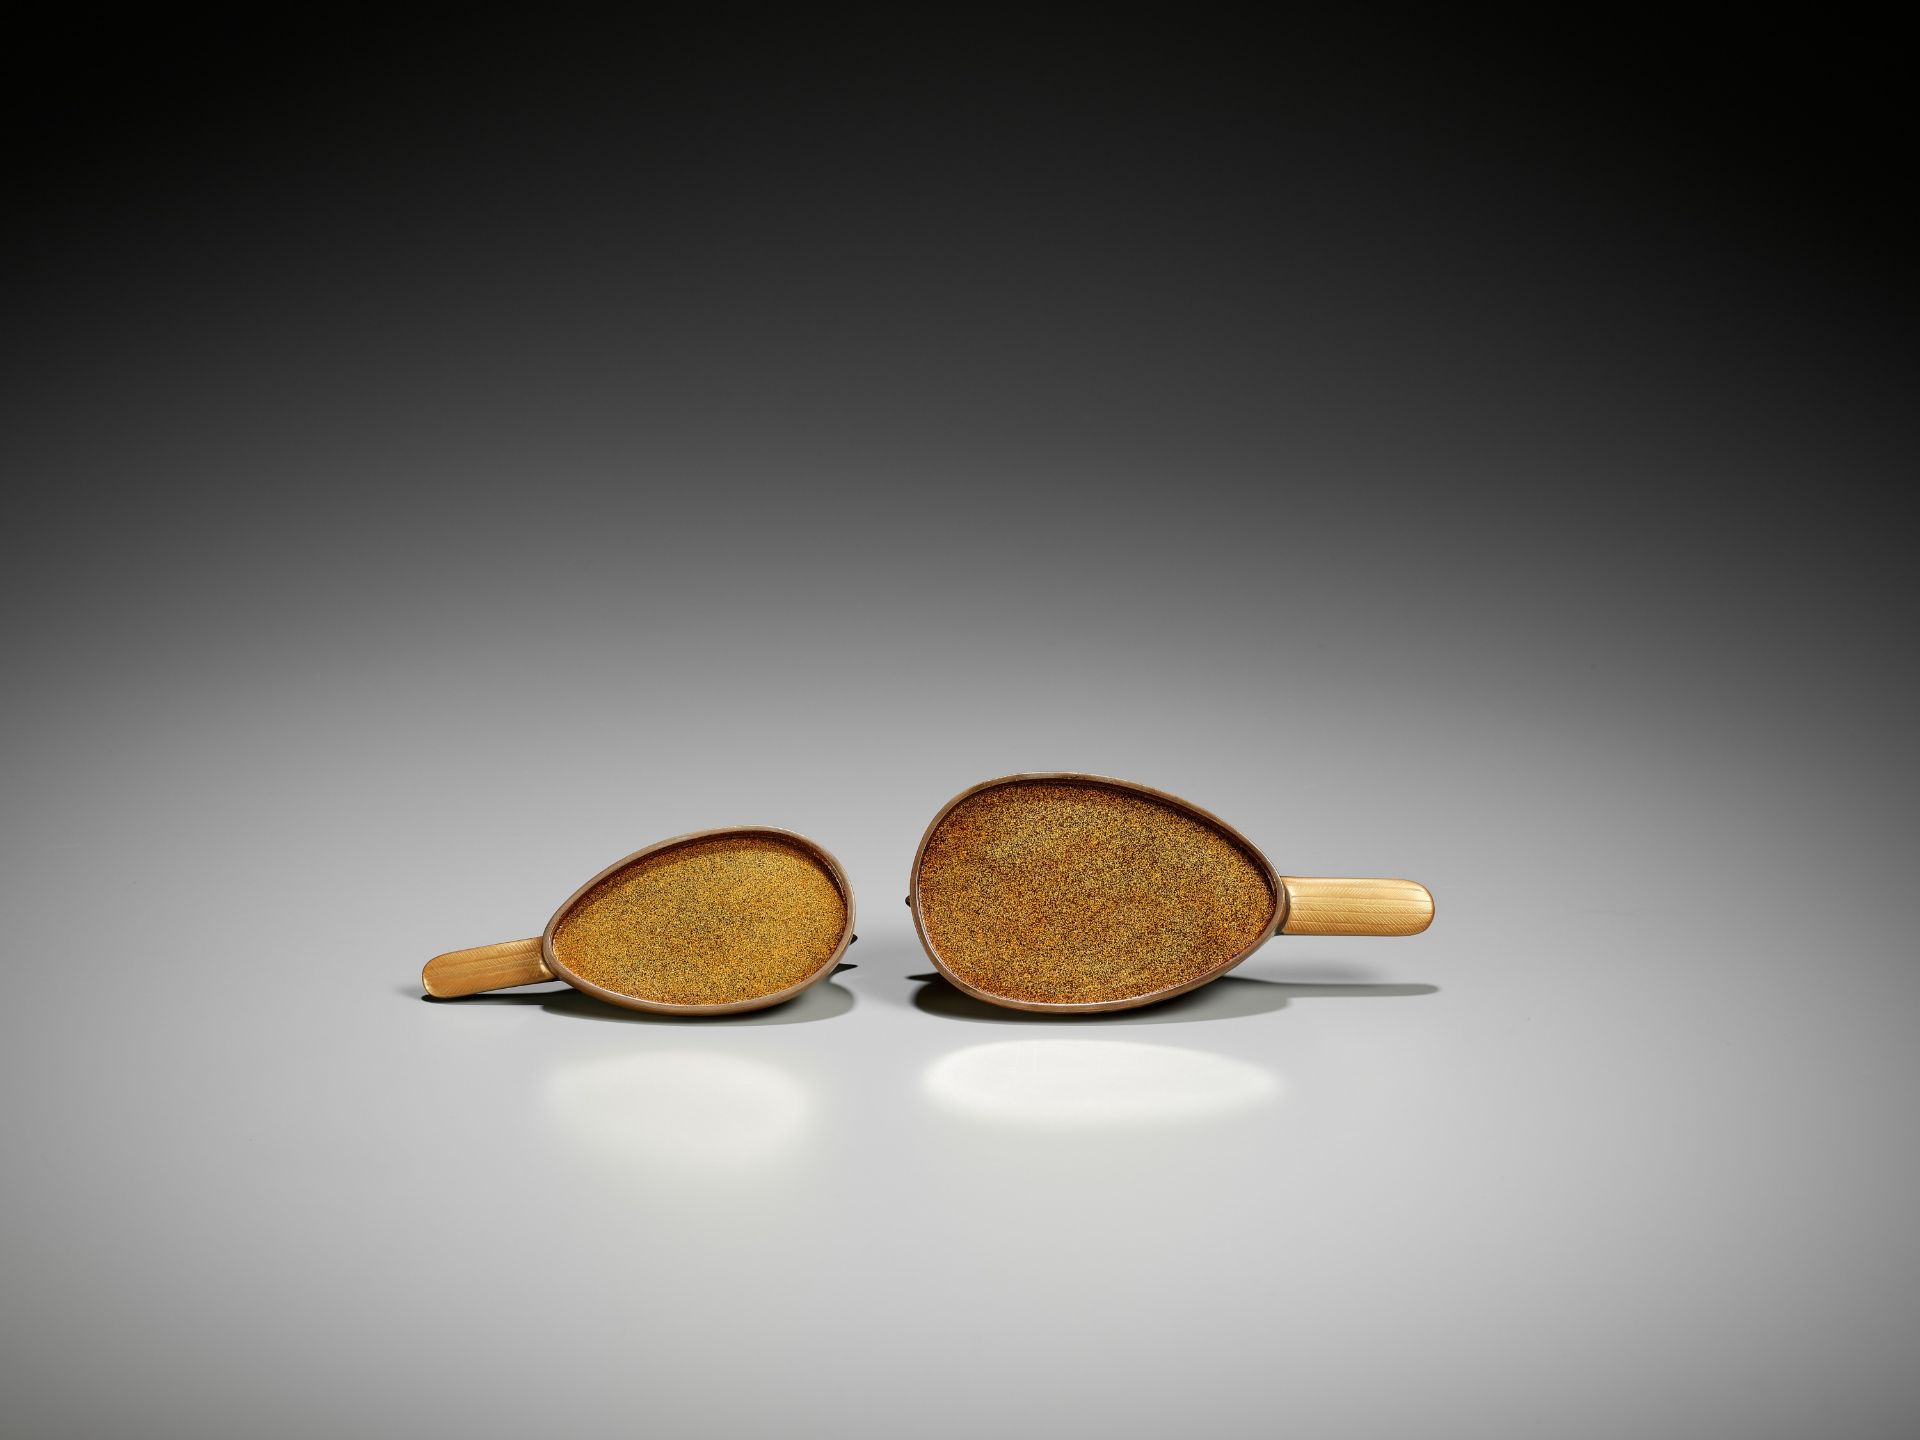 A PAIR OF GOLD LACQUER DUCK-FORM KOGO (INCENSE BOXES) AND COVERS - Image 8 of 9